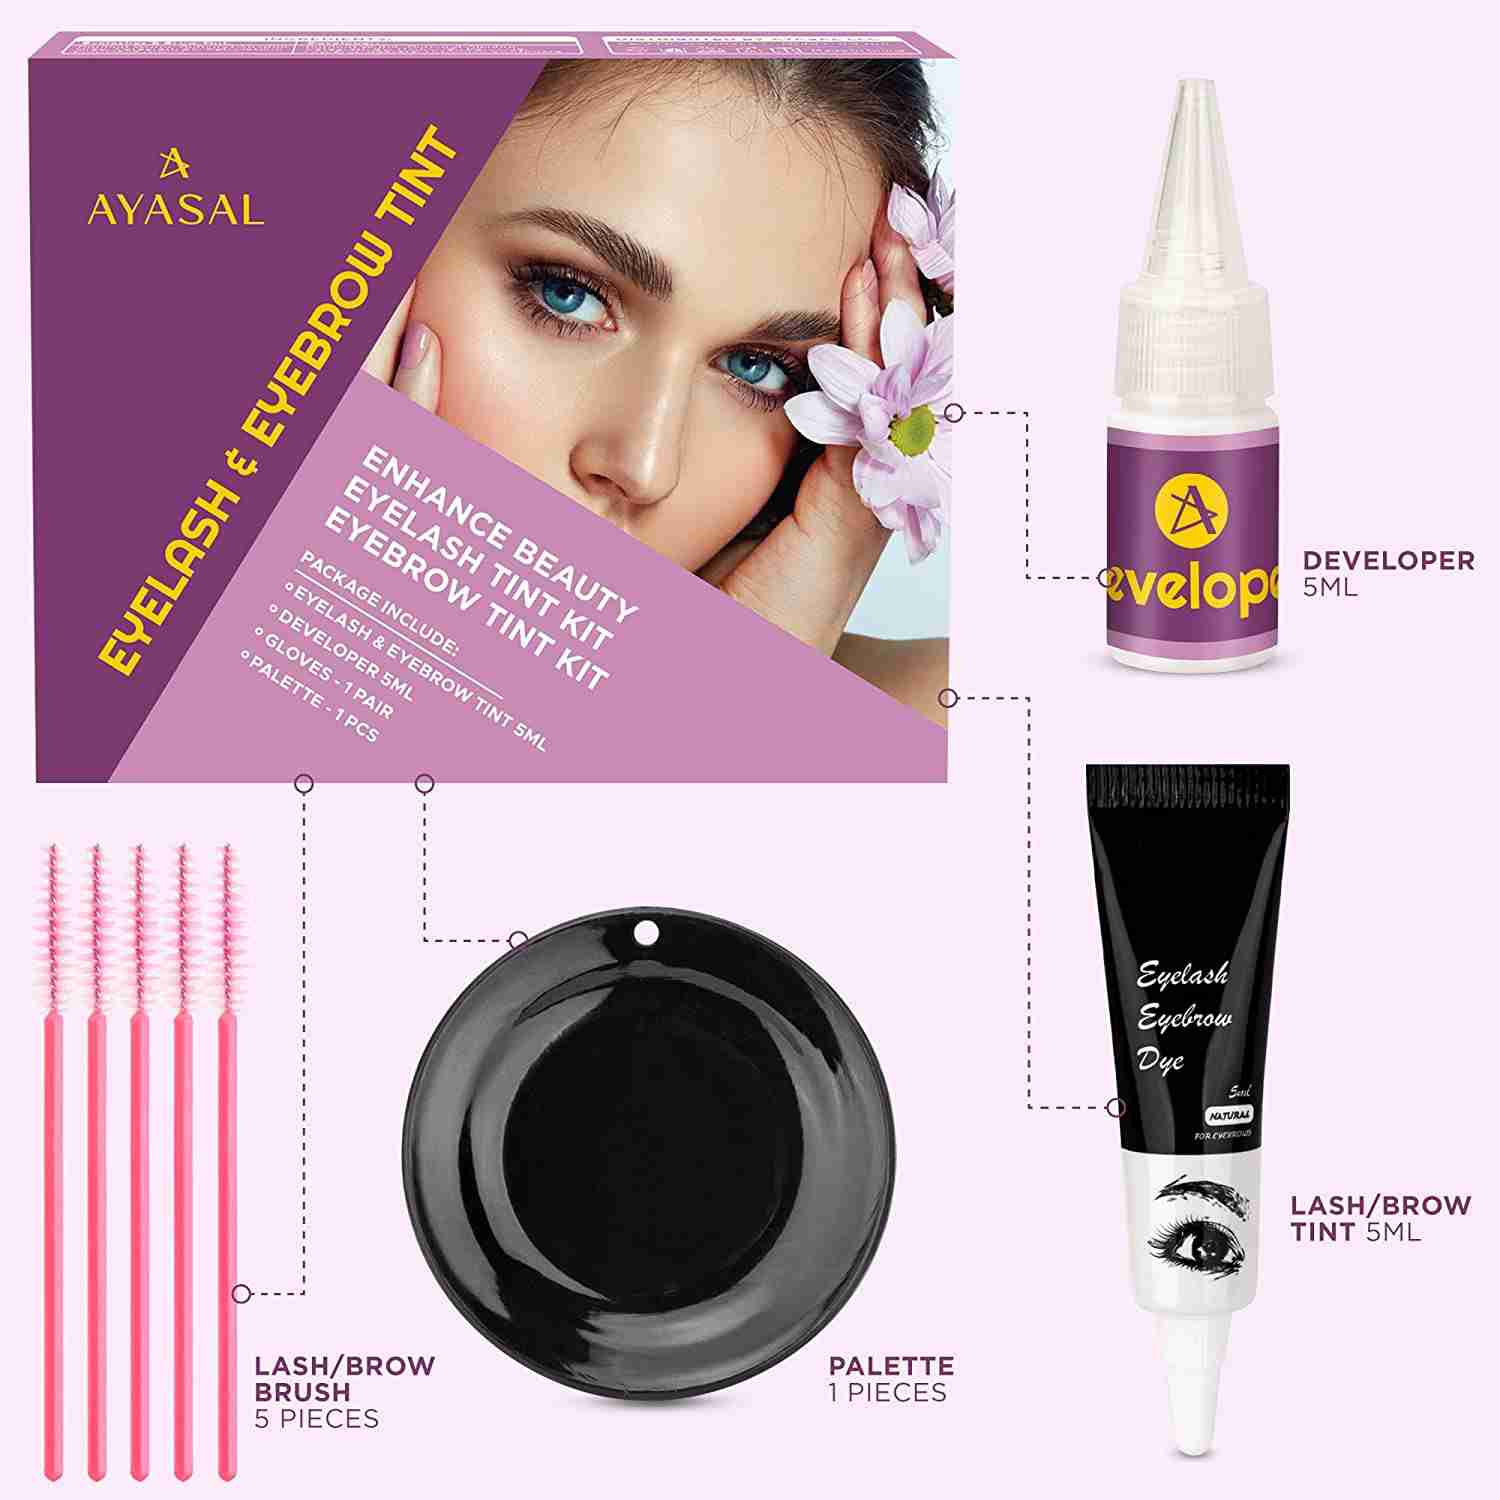 eyelash-and-eyebrow-coloring-kit with discount code